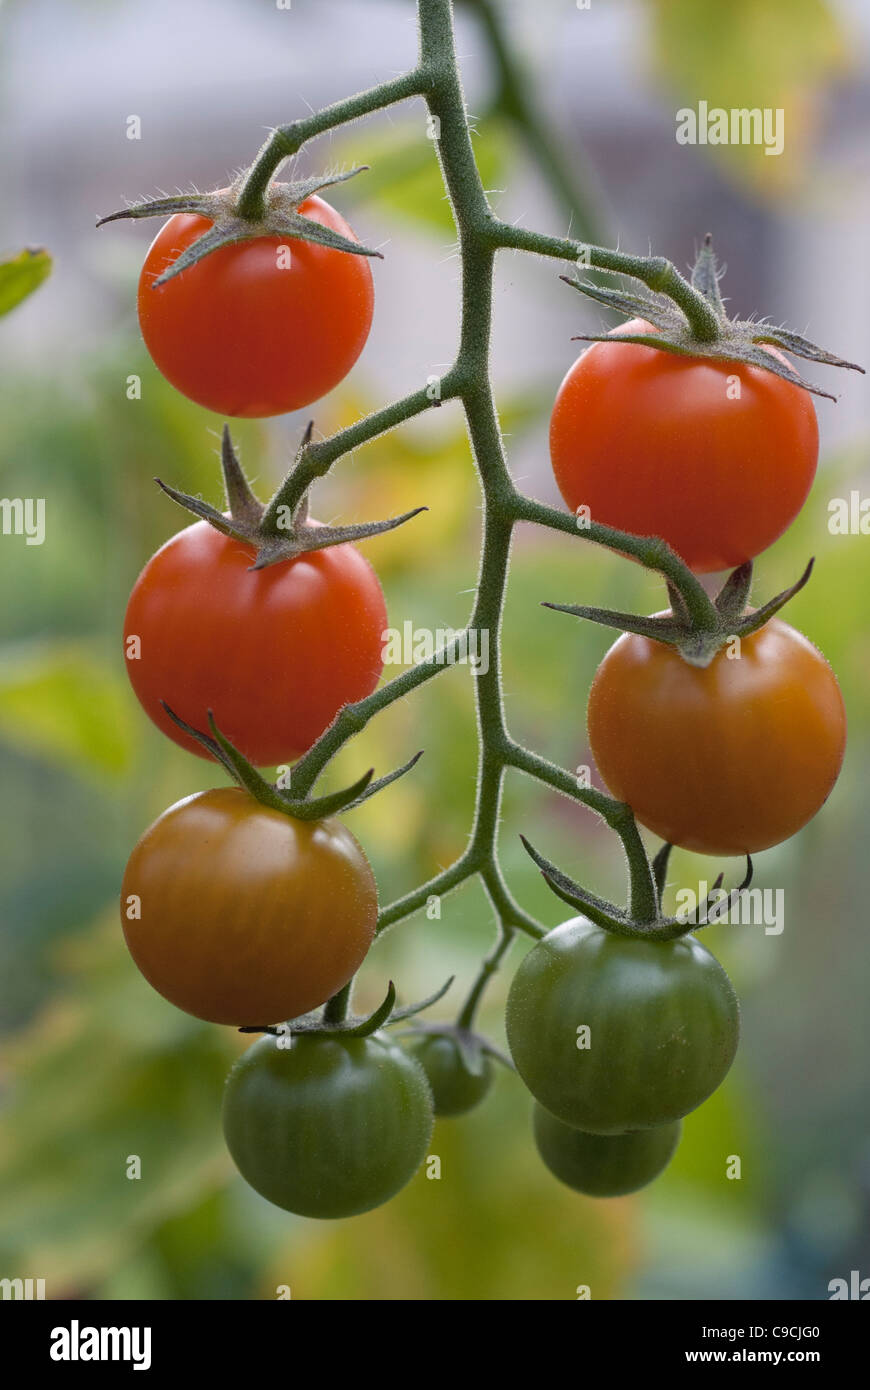 Sungold cherry tomatoes on vine Stock Photo